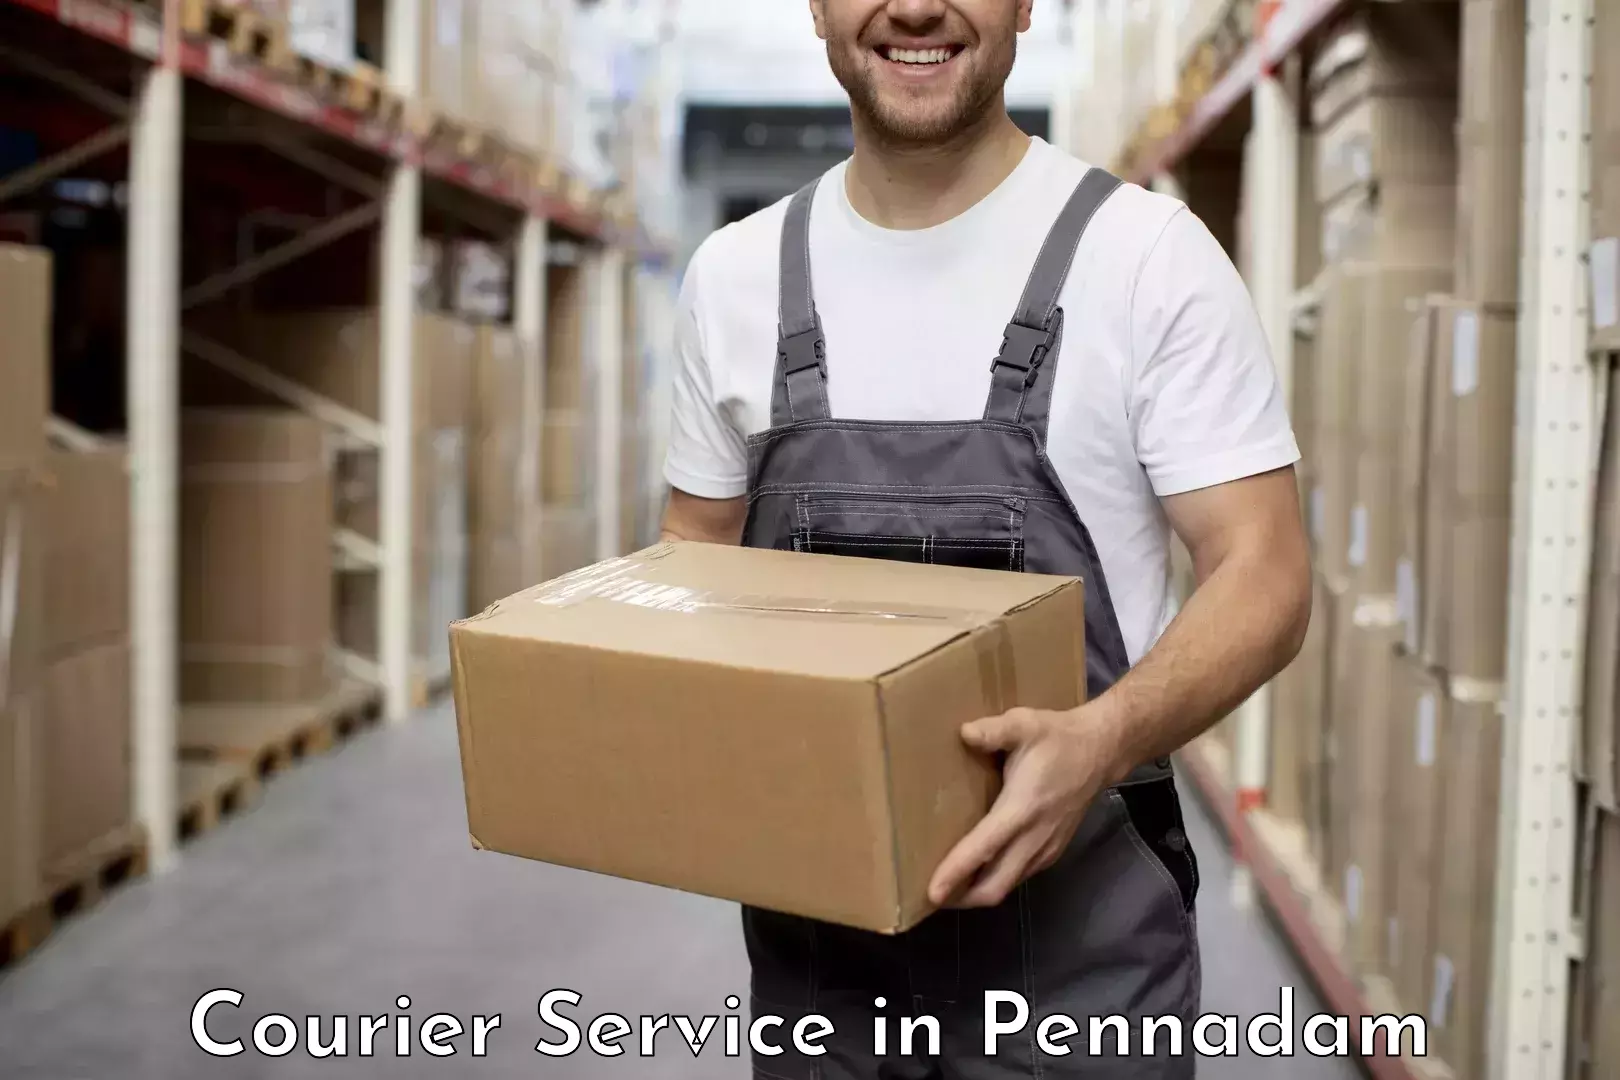 Cash on delivery service in Pennadam